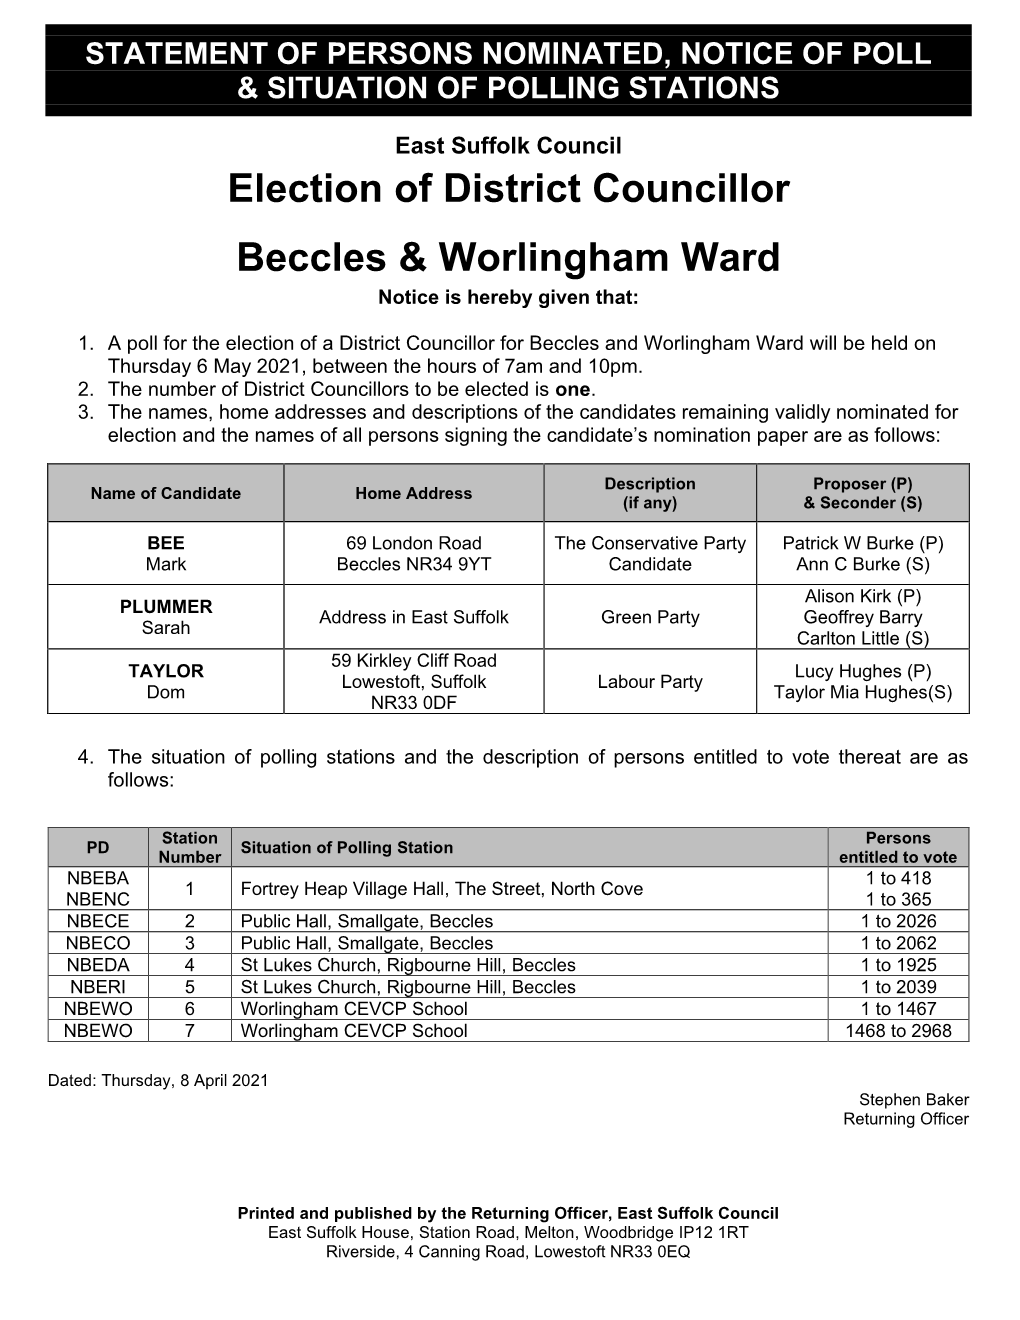 Election of District Councillor Beccles & Worlingham Ward